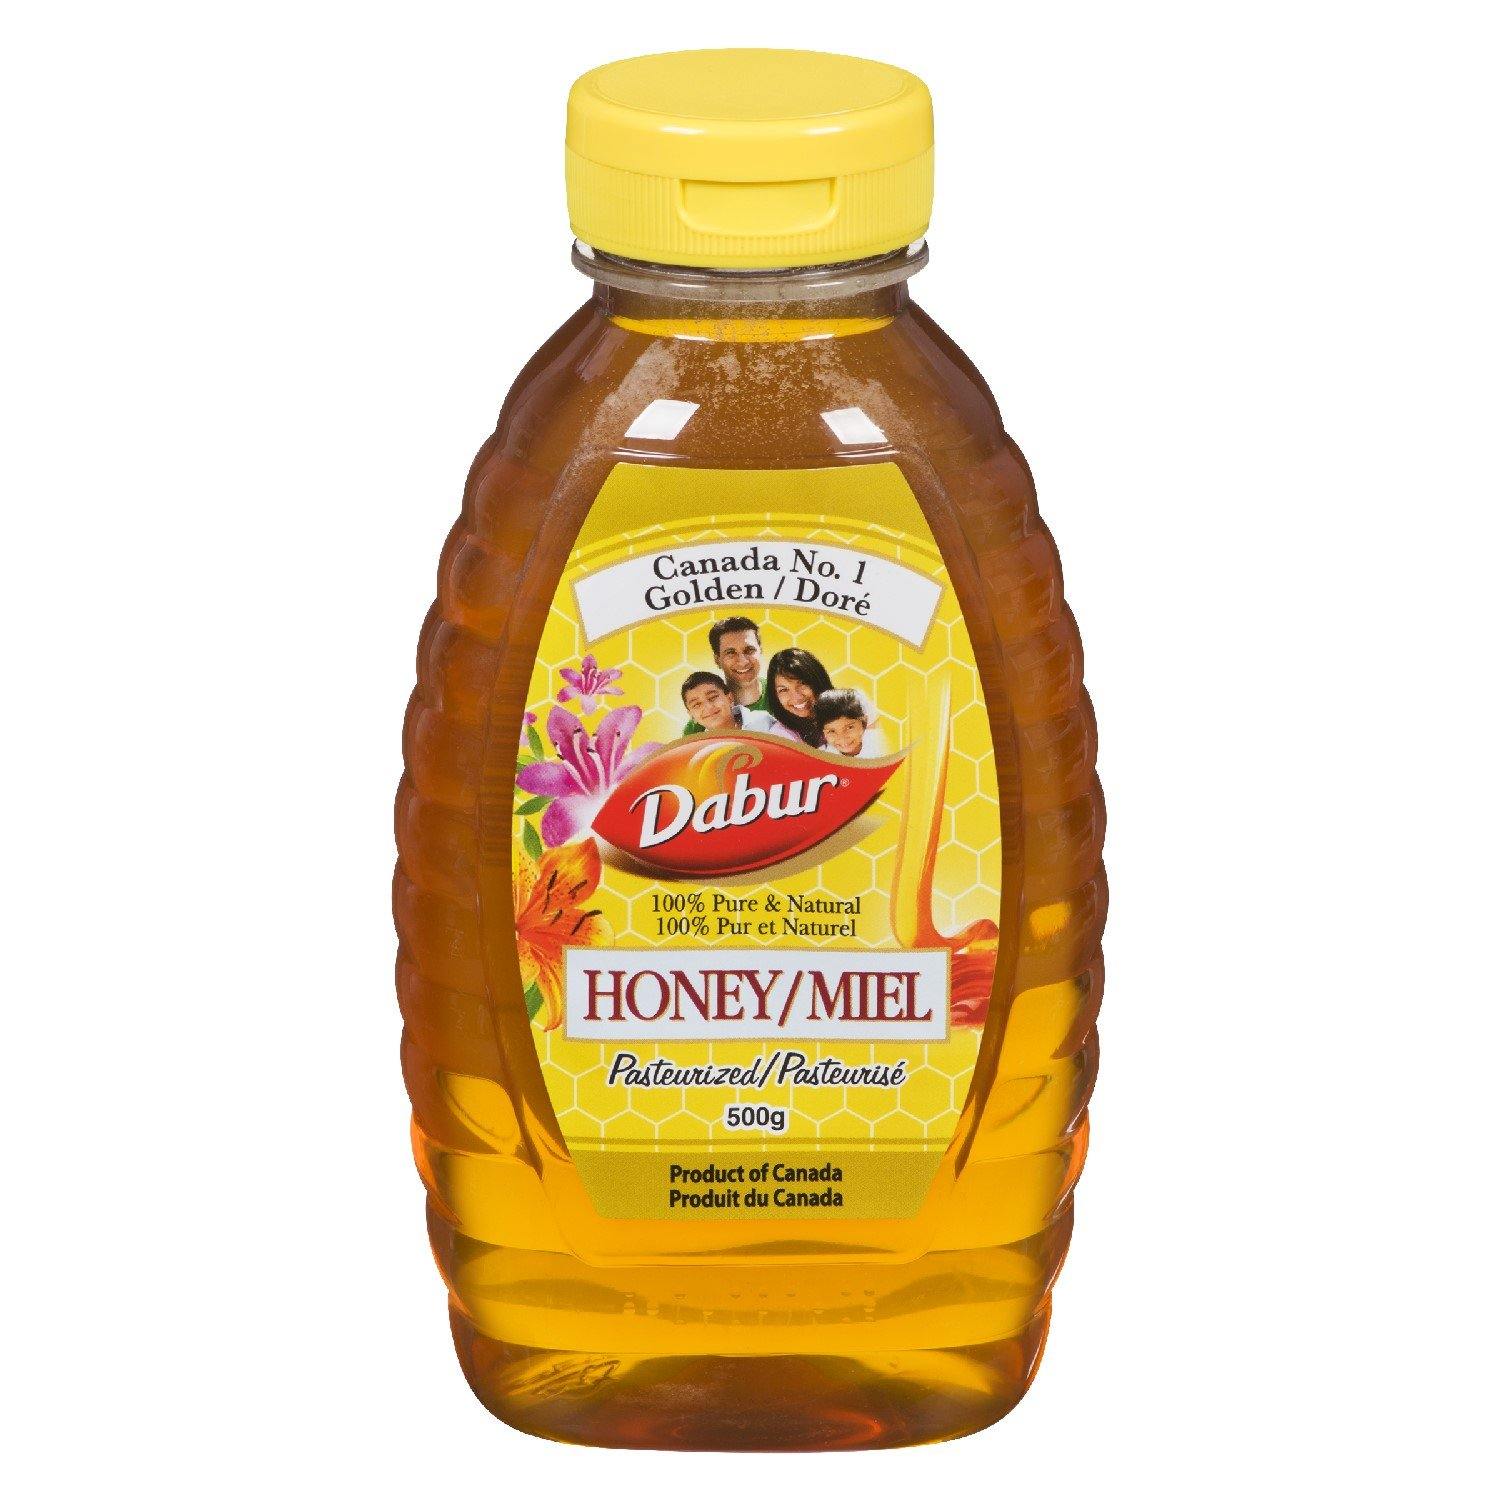 Dabur Honey 500G - Cartly - Indian Grocery Store